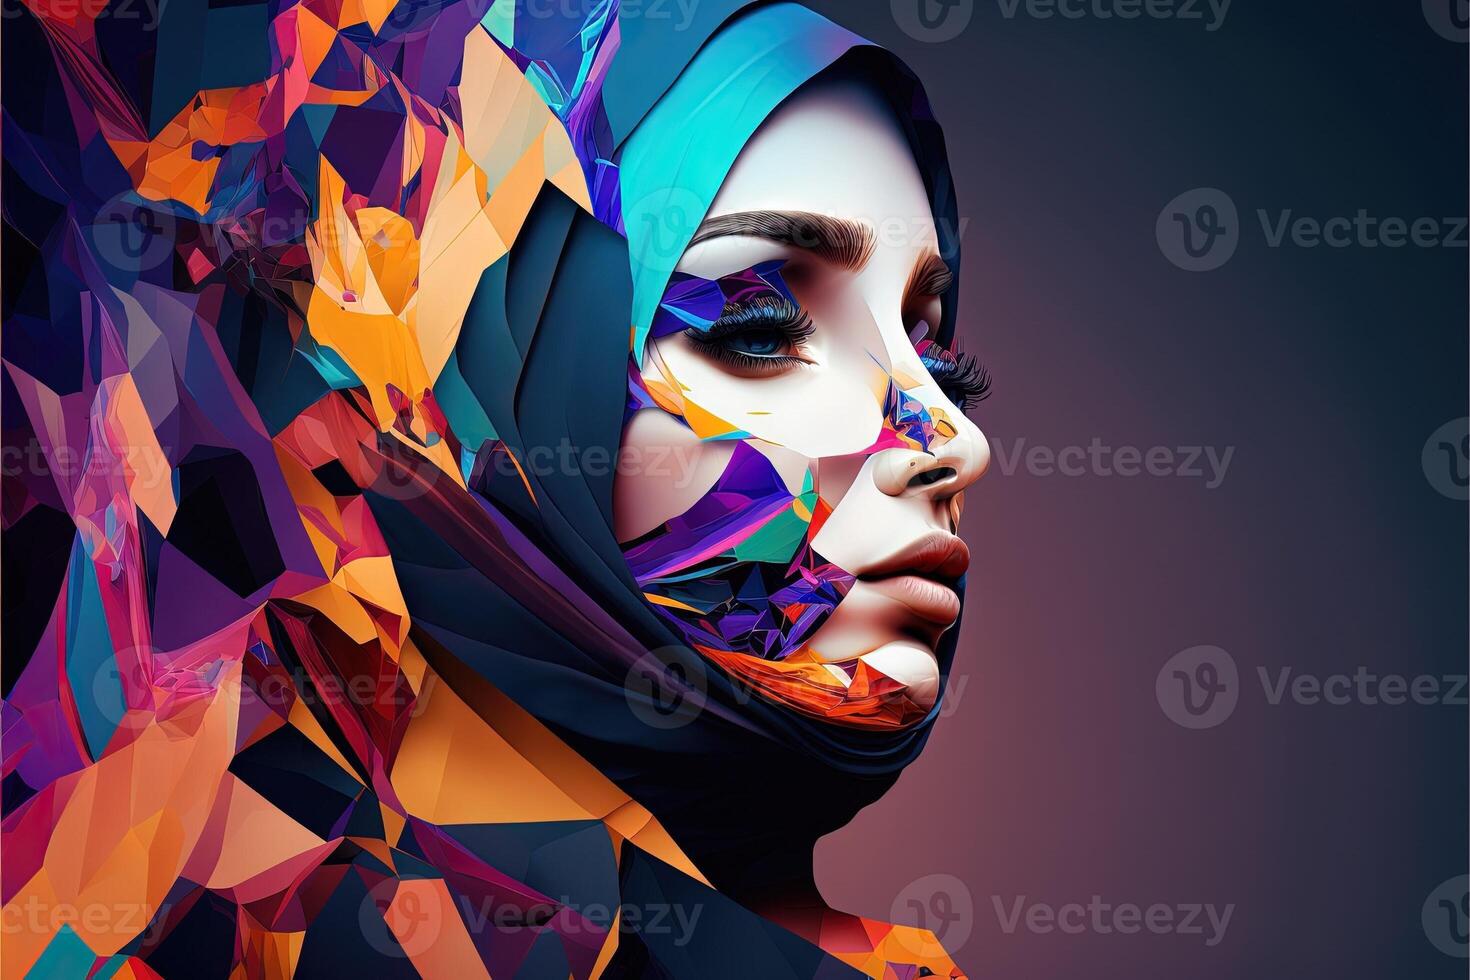 World Hijab day on february 1, hijab girl women head cover abstract representation photo